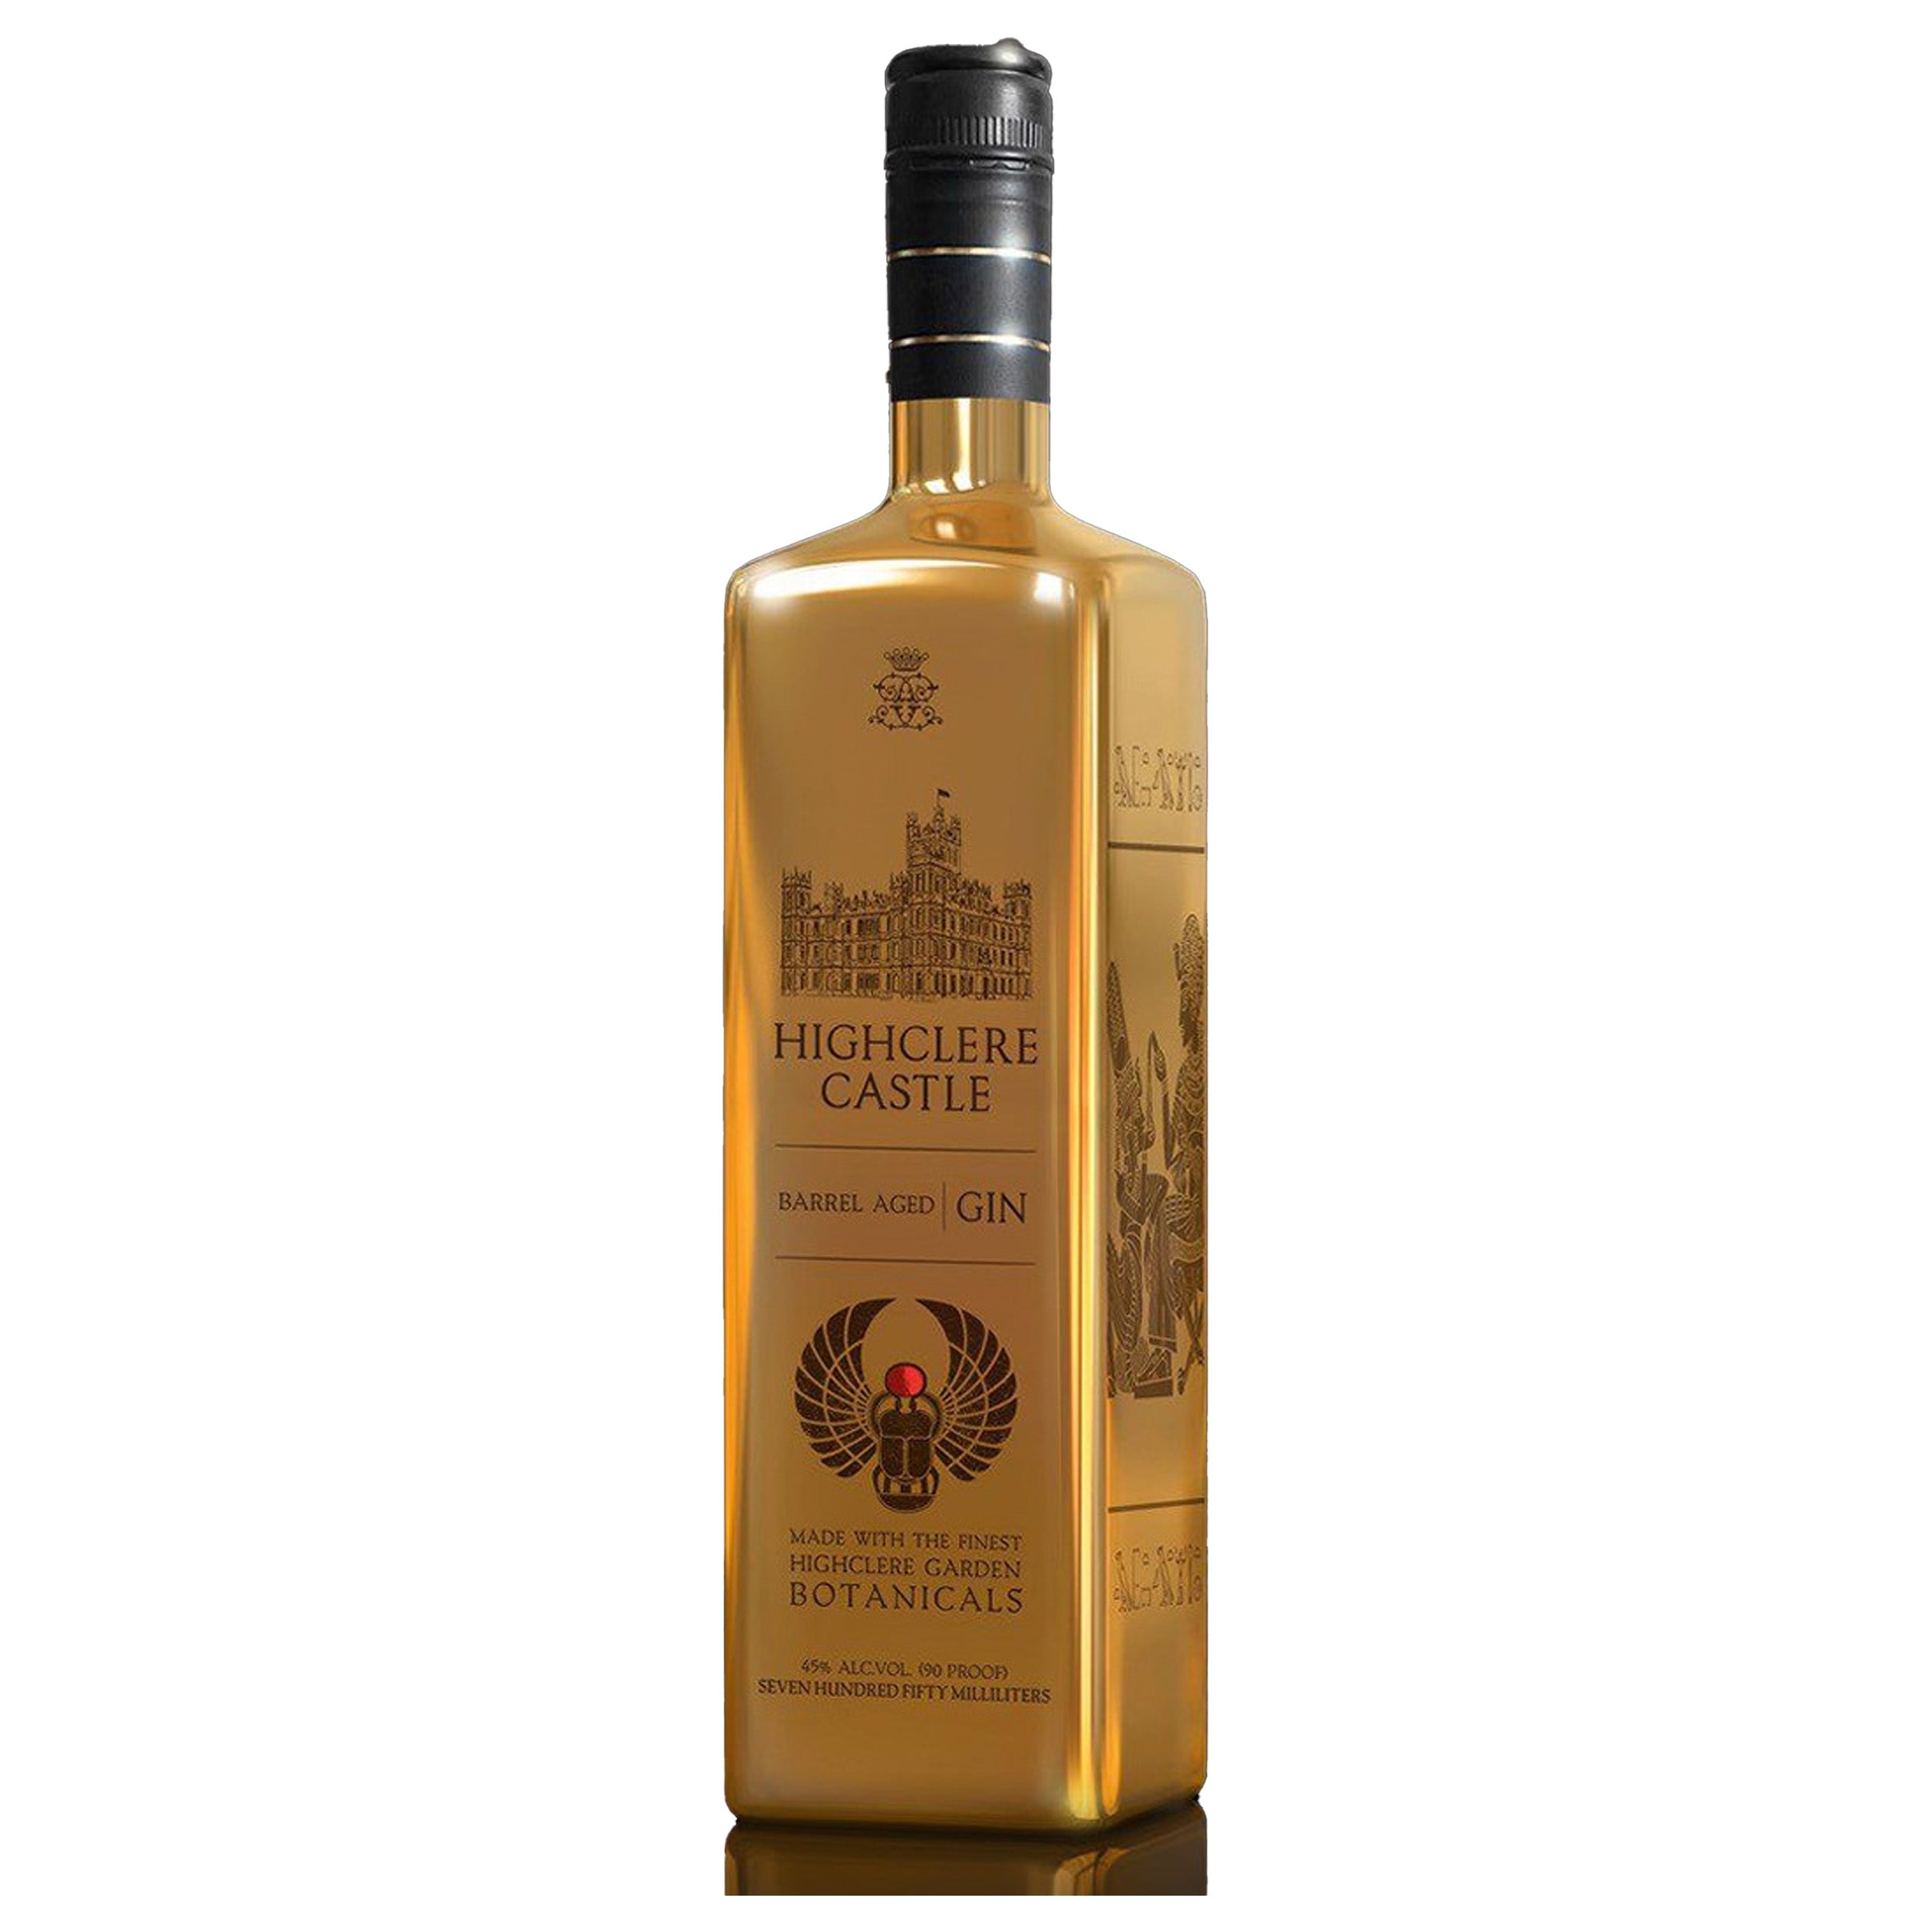 Highclere Castle Barrel Aged Dry Gin